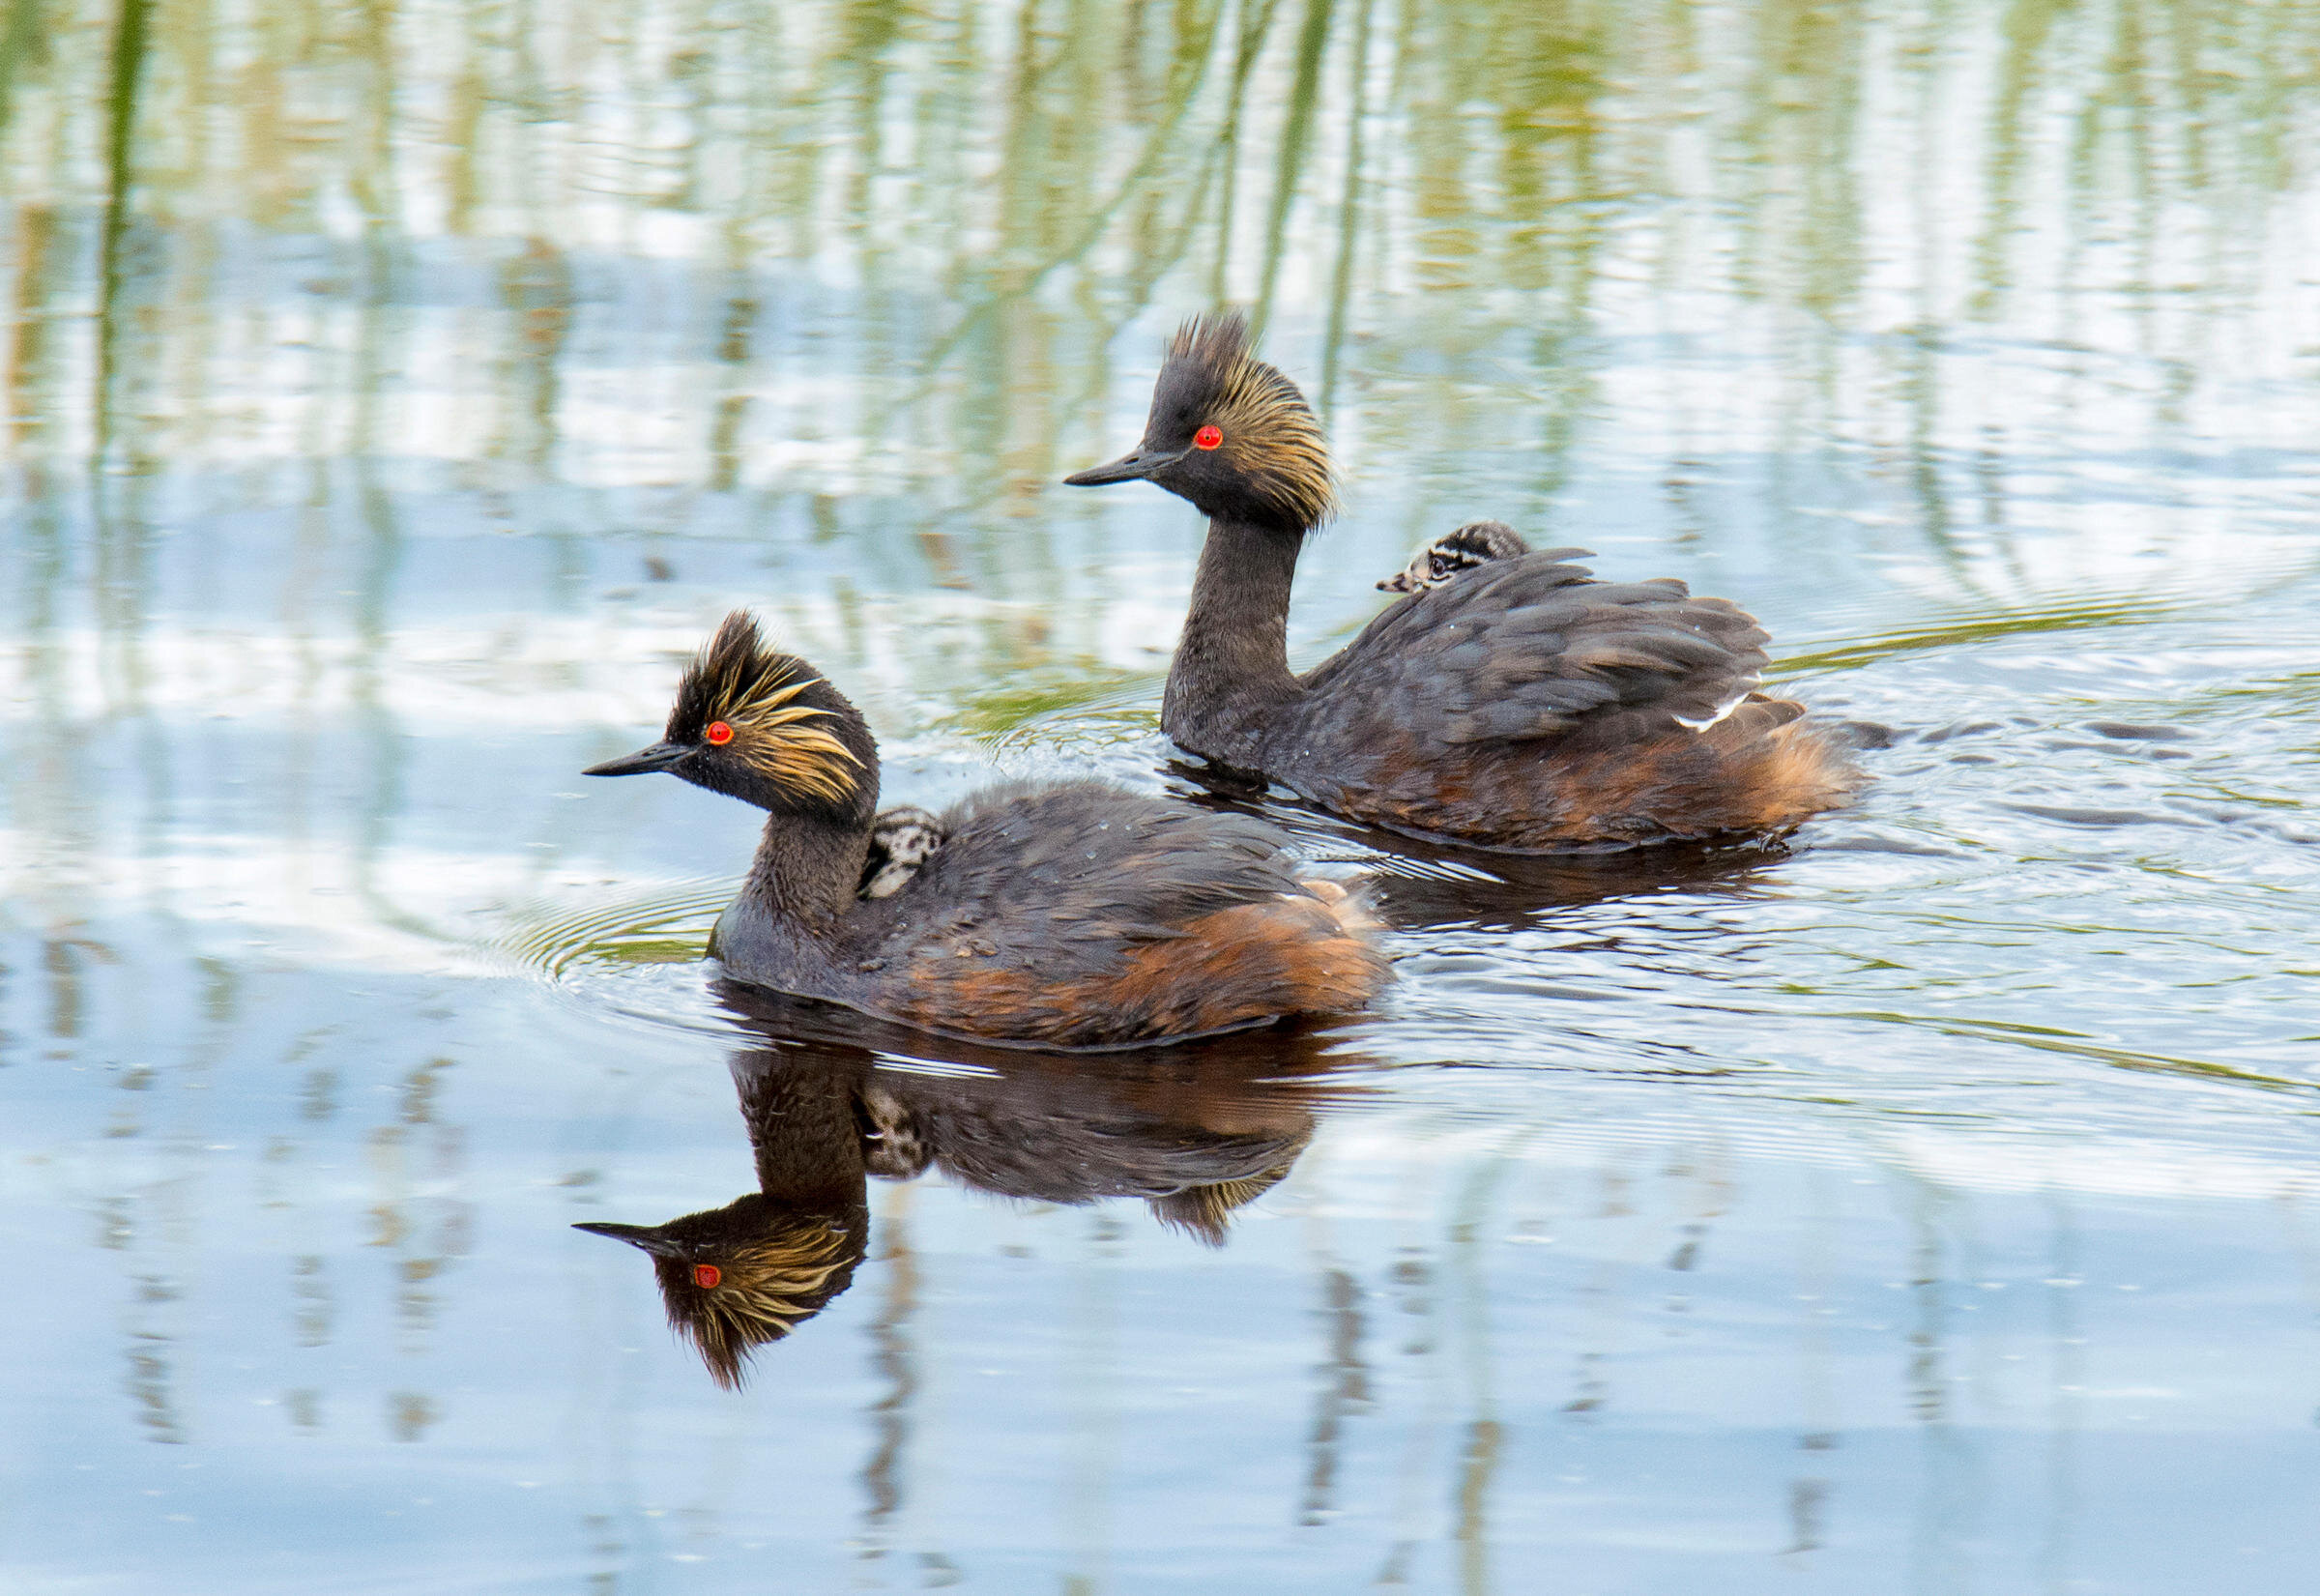 Eared grebe - breeding adults and downy young.  Photo: Wendy Crowe/Audubon Photography Awards